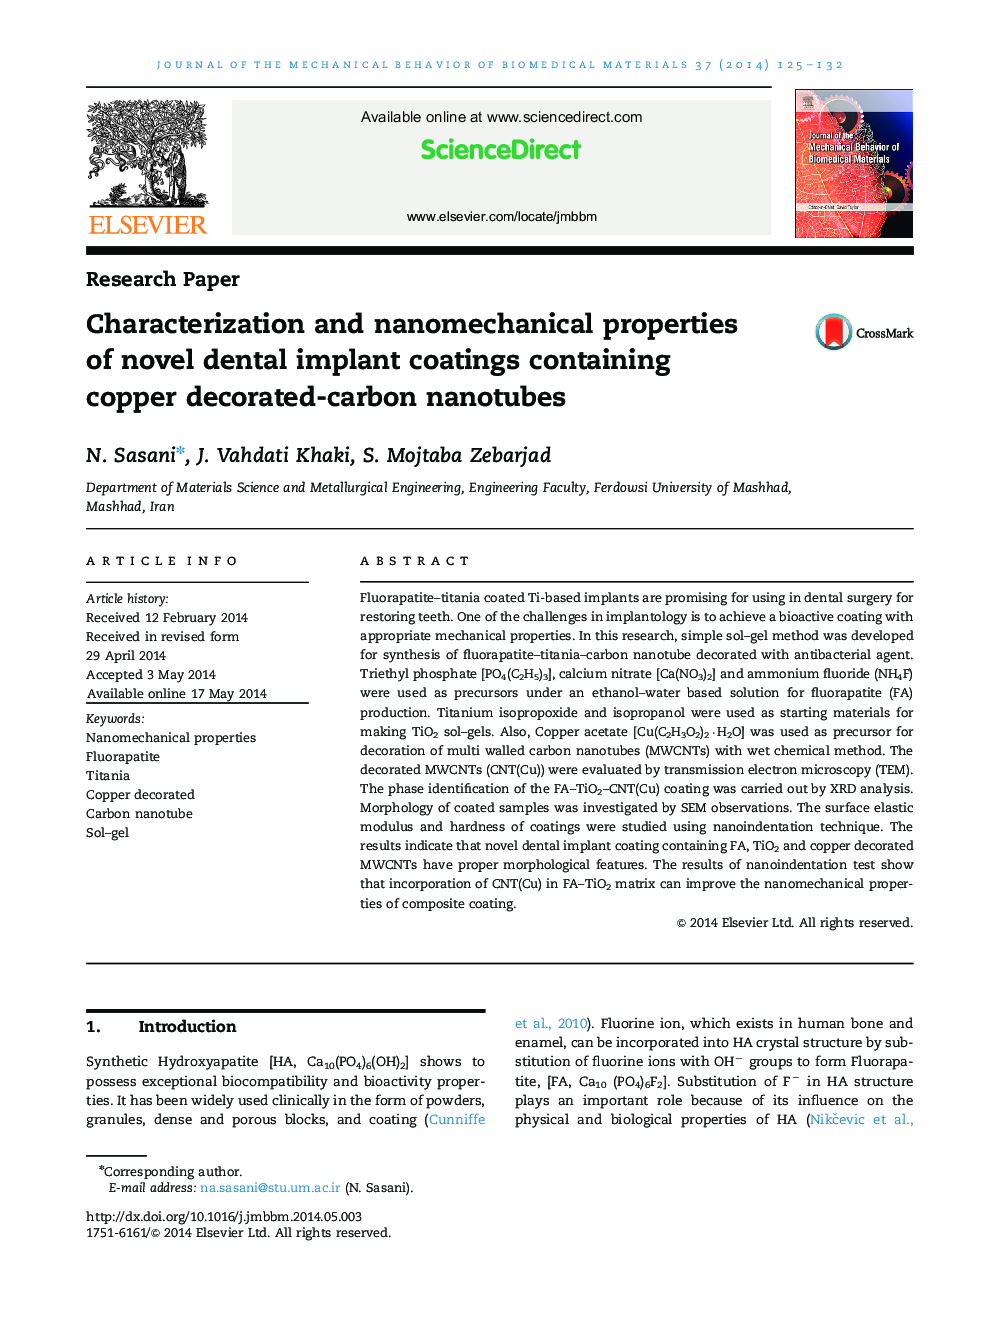 Characterization and nanomechanical properties of novel dental implant coatings containing copper decorated-carbon nanotubes